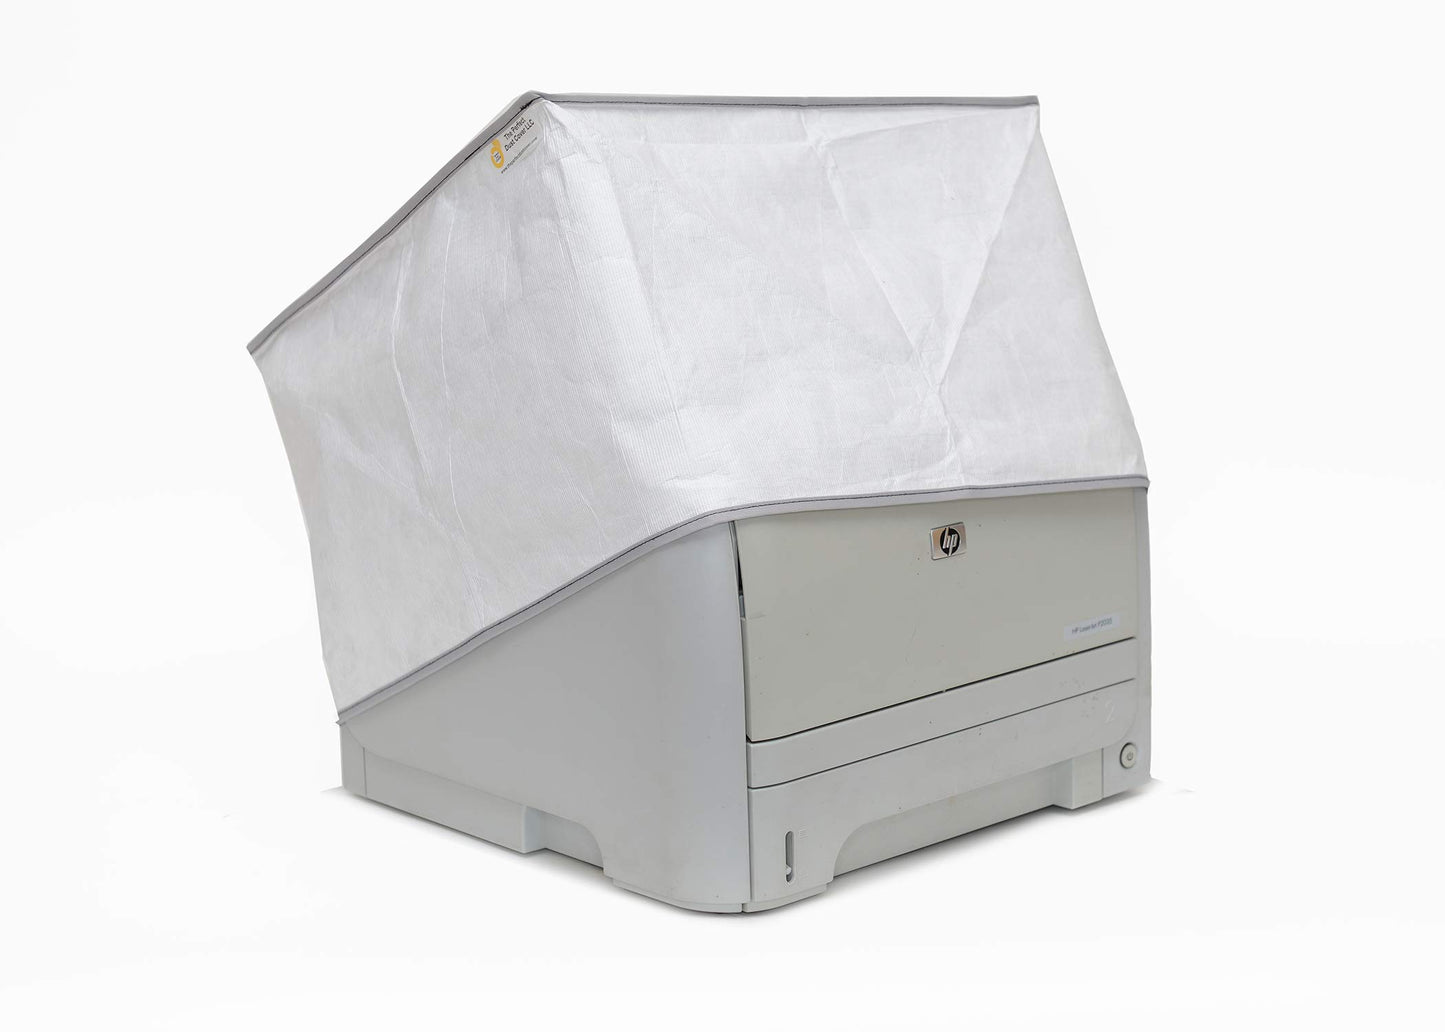 The Perfect Dust Cover, White Vinyl Cover for Brother MFC-J805DW INKvestment Tank All-in-One Printer, Anti Static, Waterproof Cover Dimensions 17.1''W x 13.4''D x 7.7''H by The Perfect Dust Cover LLC